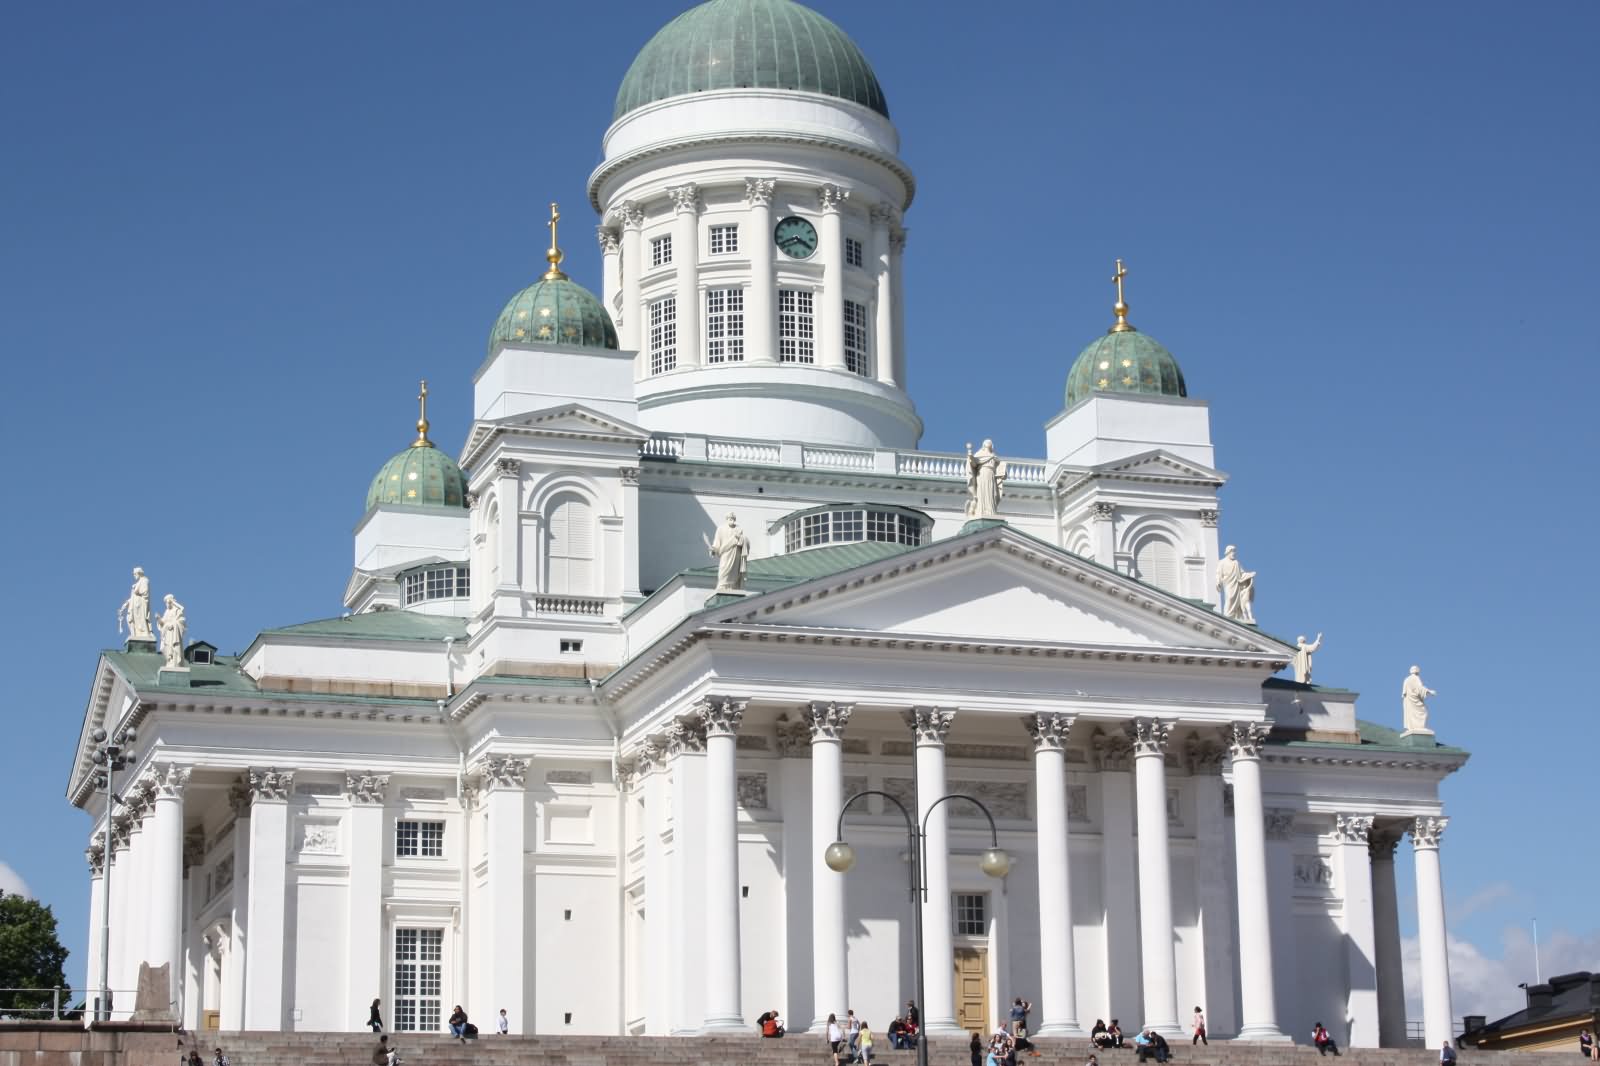 The Helsinki Cathedral Image